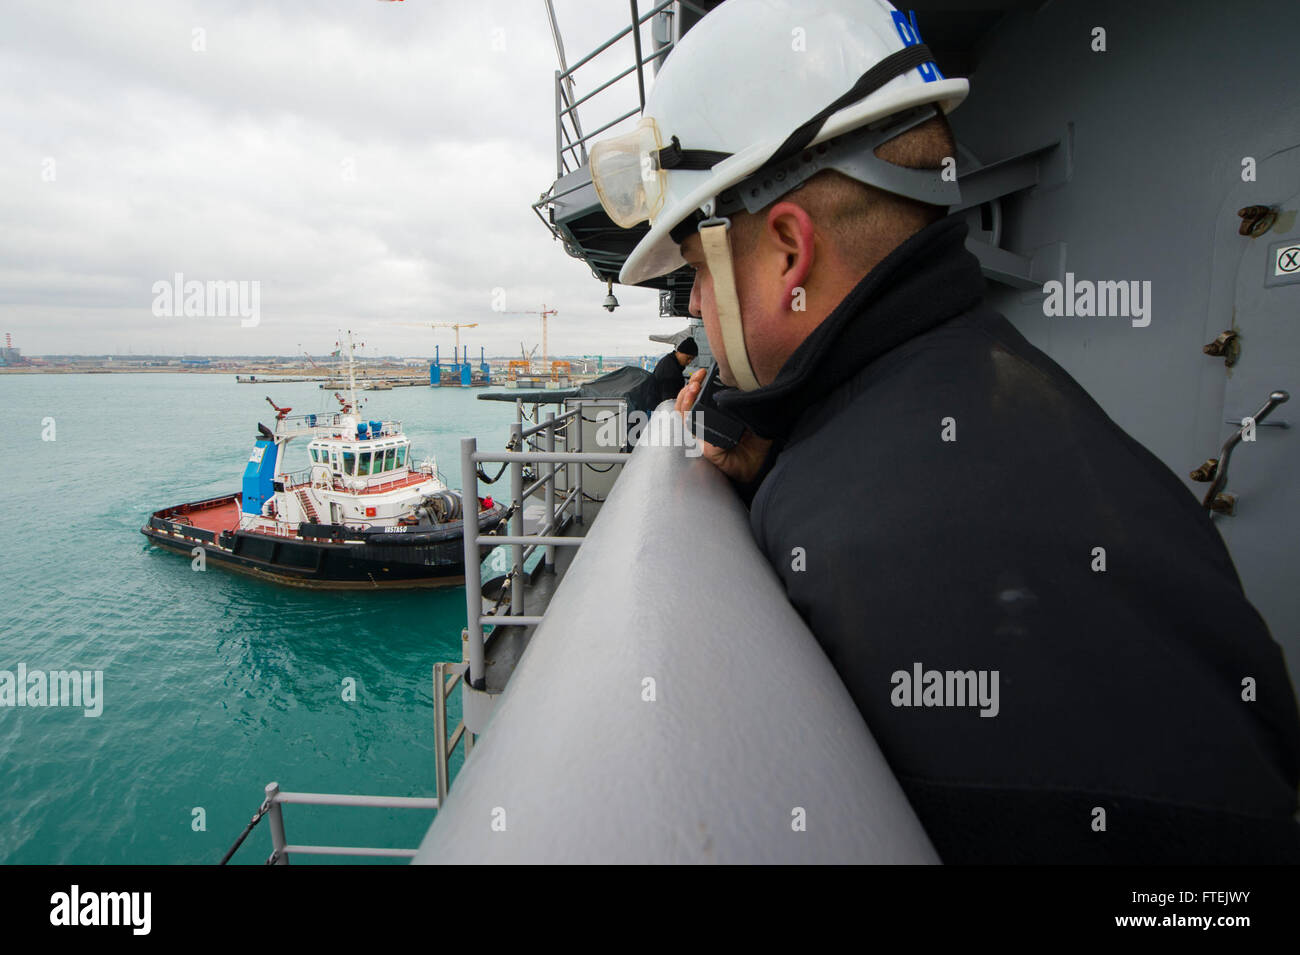 CIVITAVECCHIA, Italy (Jan. 3, 2015) Chief Boatswain's Mate Brandon Bonin, a native of New Iberia, Louisiana, observes a tug boat, while relaying instructions to the bridge as amphibious assault ship USS Iwo Jima (LHD 7) depart Civitavecchia, Italy, Jan. 3, 2015. Iwo Jima pulled in to Civitavecchia Dec. 30 for a scheduled port visit before continuing its deployment in support of maritime security operations and theater security cooperation efforts in the U.S. 6th Fleet areas of operations. Stock Photo